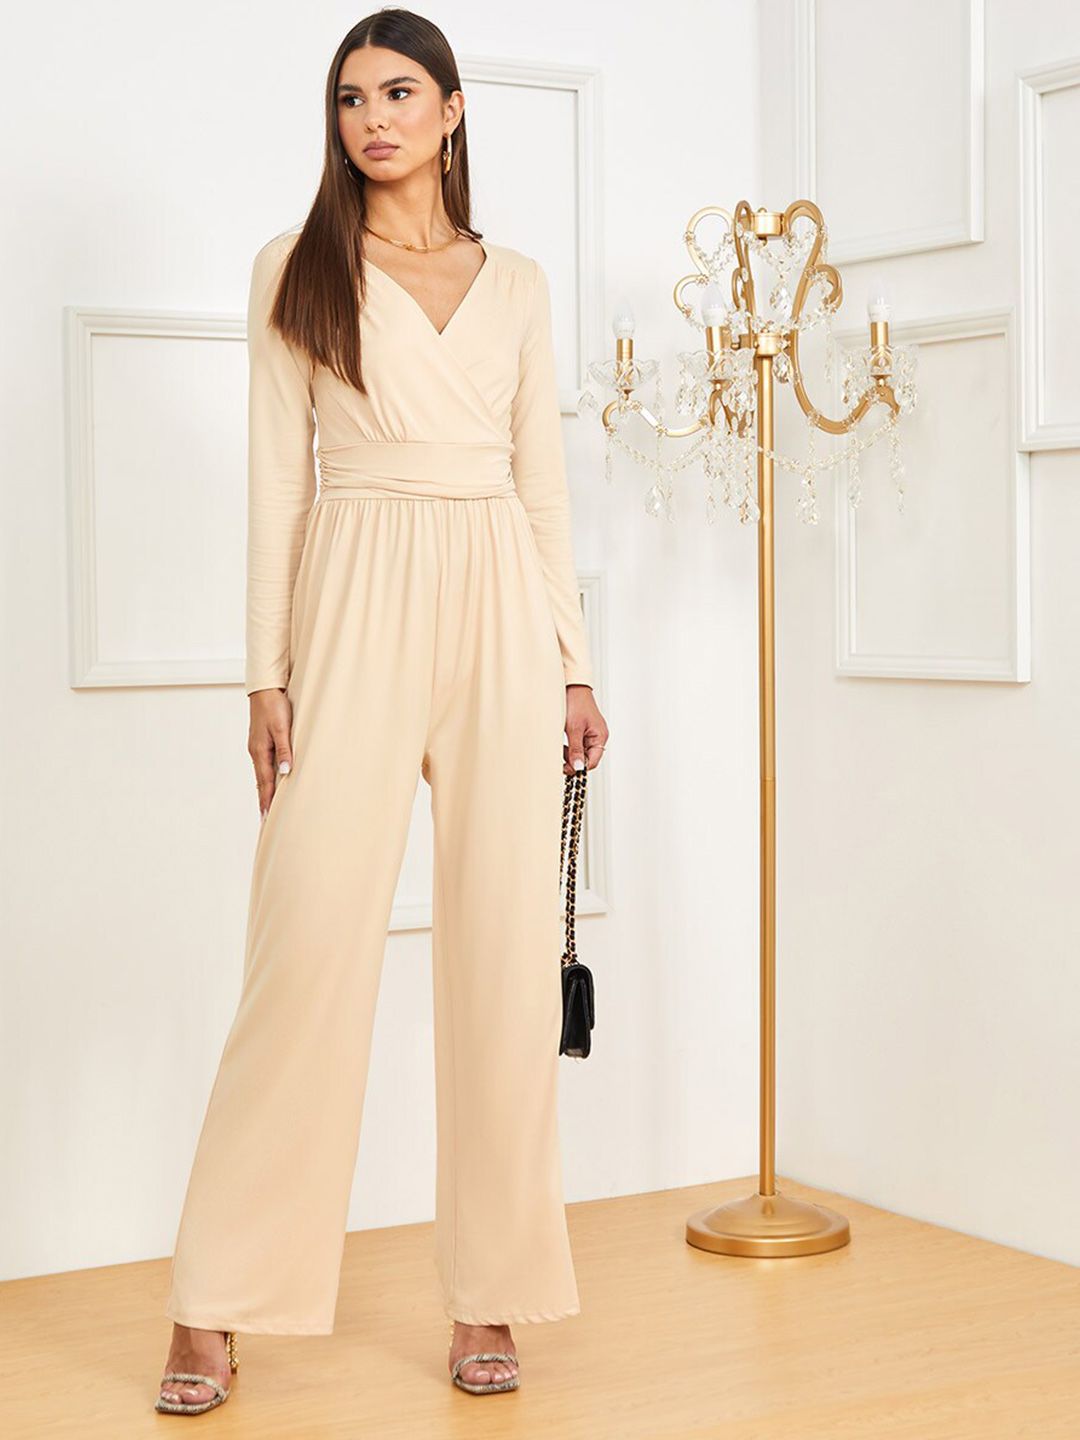 Styli Beige Basic Jumpsuit Price in India